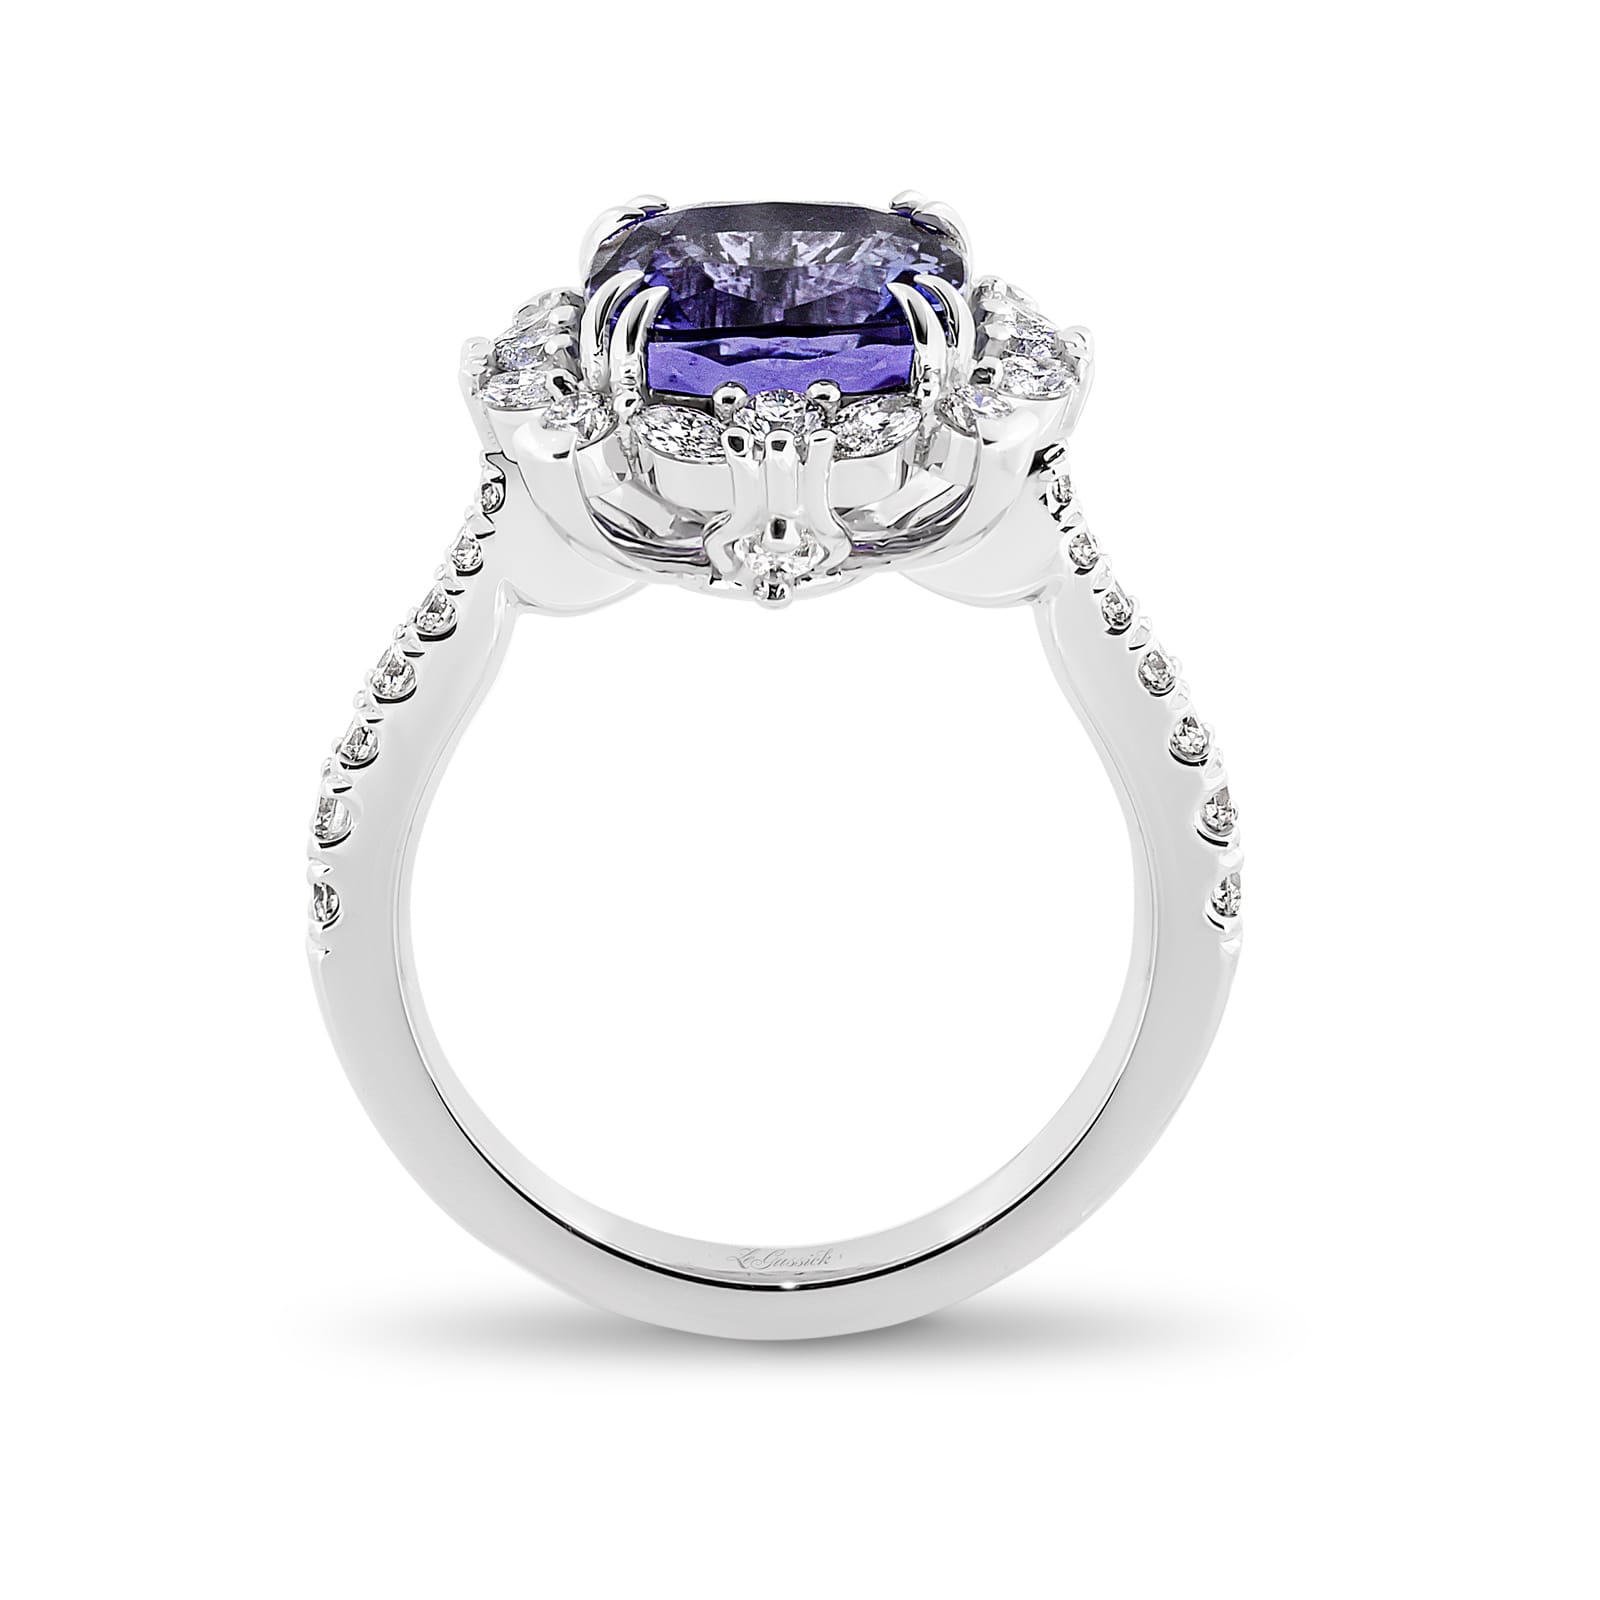 Violetta has a 4.06 carat cushion-cut tanzanite centre surrounded by a halo of alternating white round brilliant cut and marquise cut diamonds. Featuring 2 marquise cut diamonds underneath the ring and 14 round white diamonds on the band. She was designed and handcrafted by LeGassick's Master Jewellers, Gold Coast, Australia.v